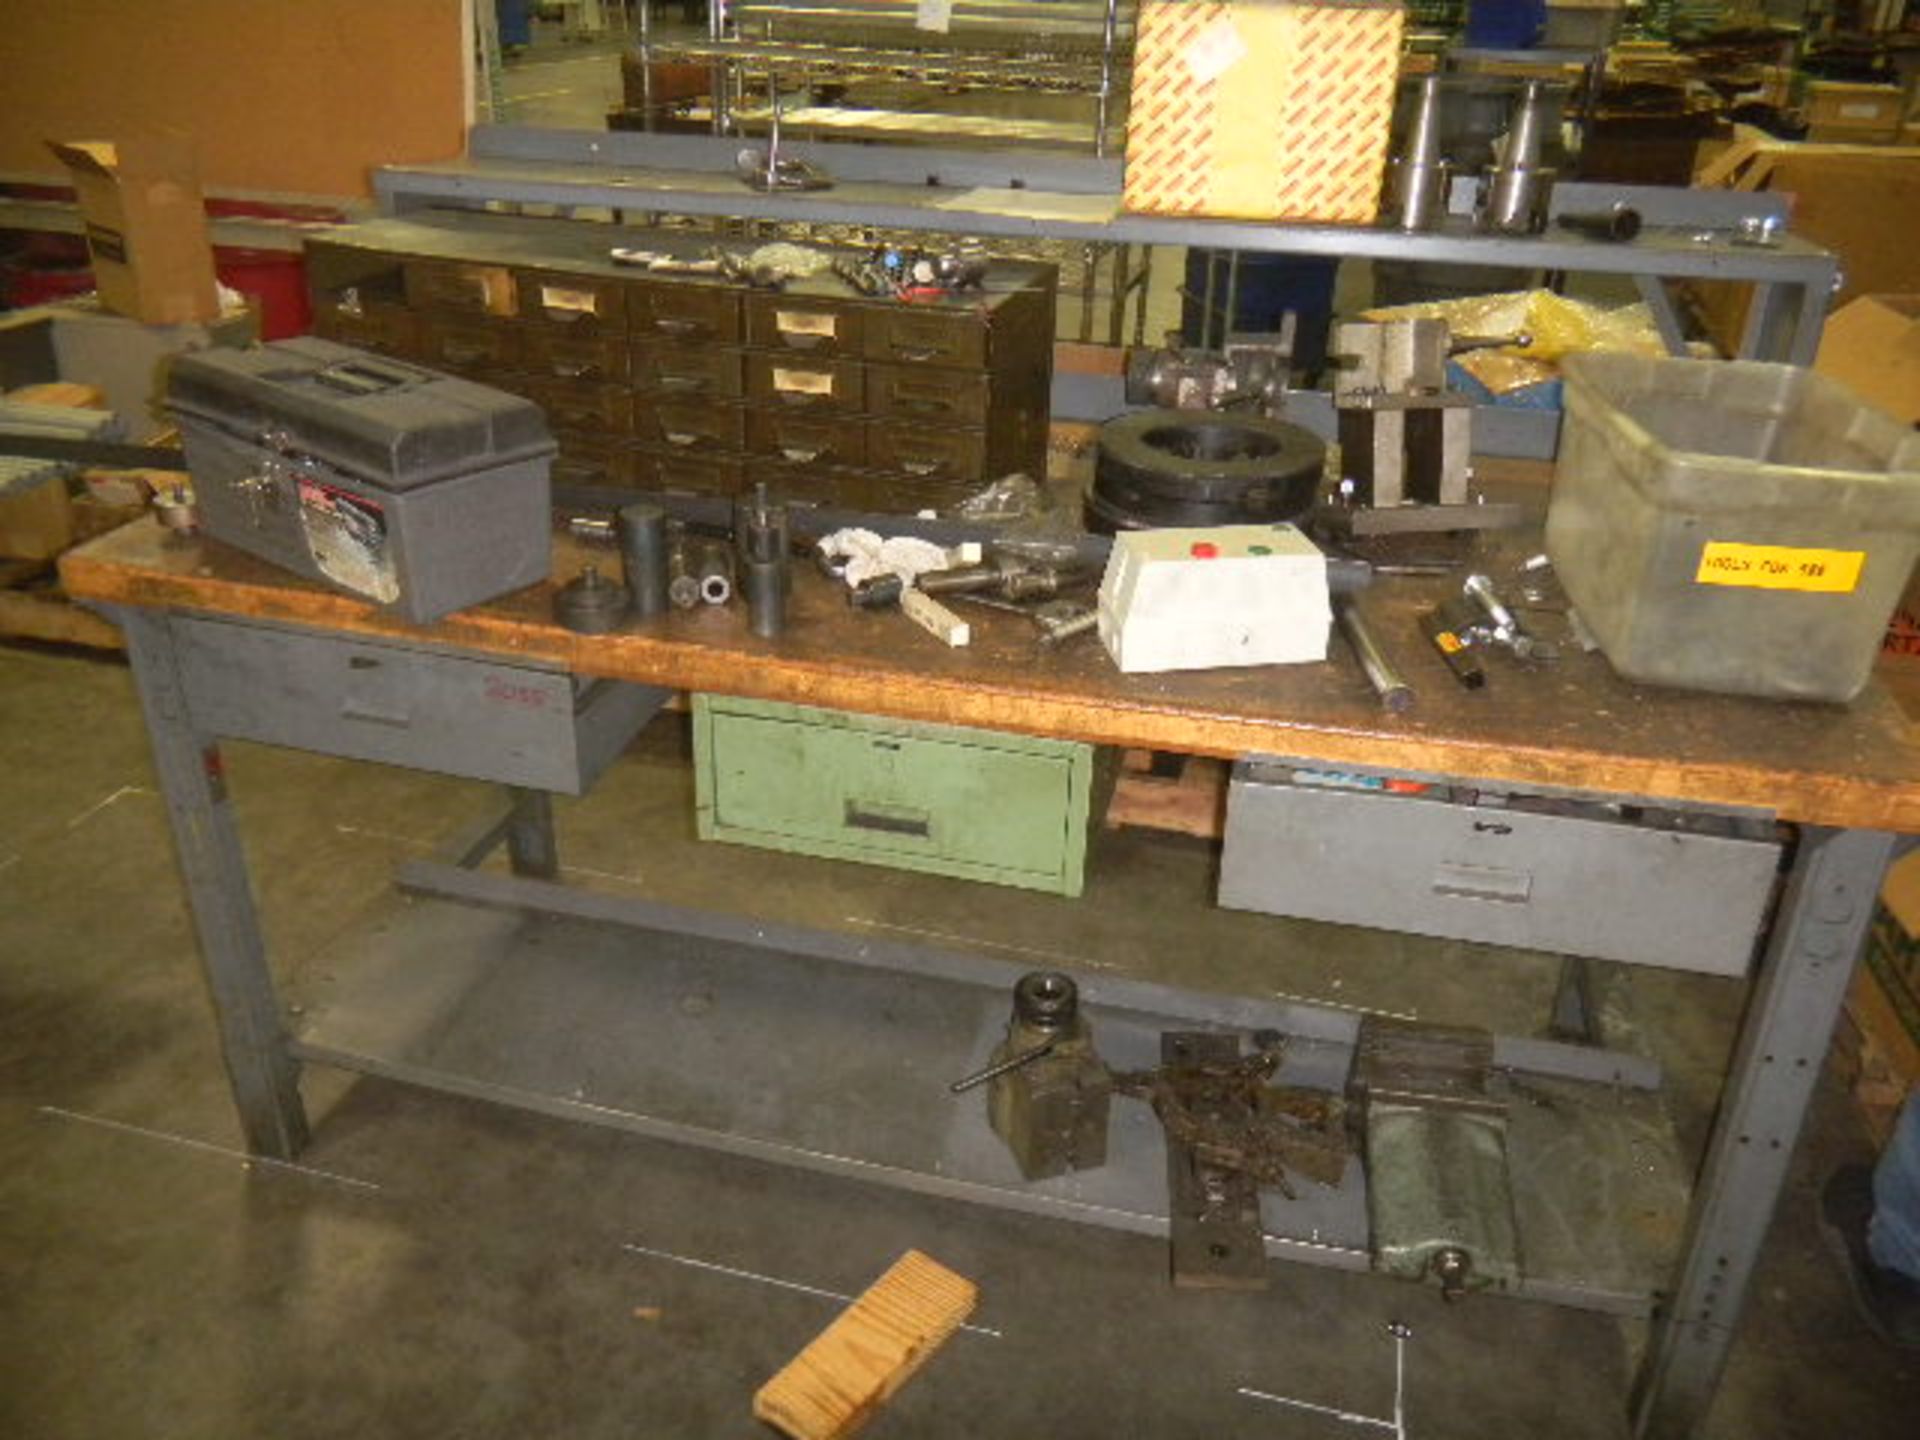 Production Work Table / Bench - Includes Toolboxes & Contents